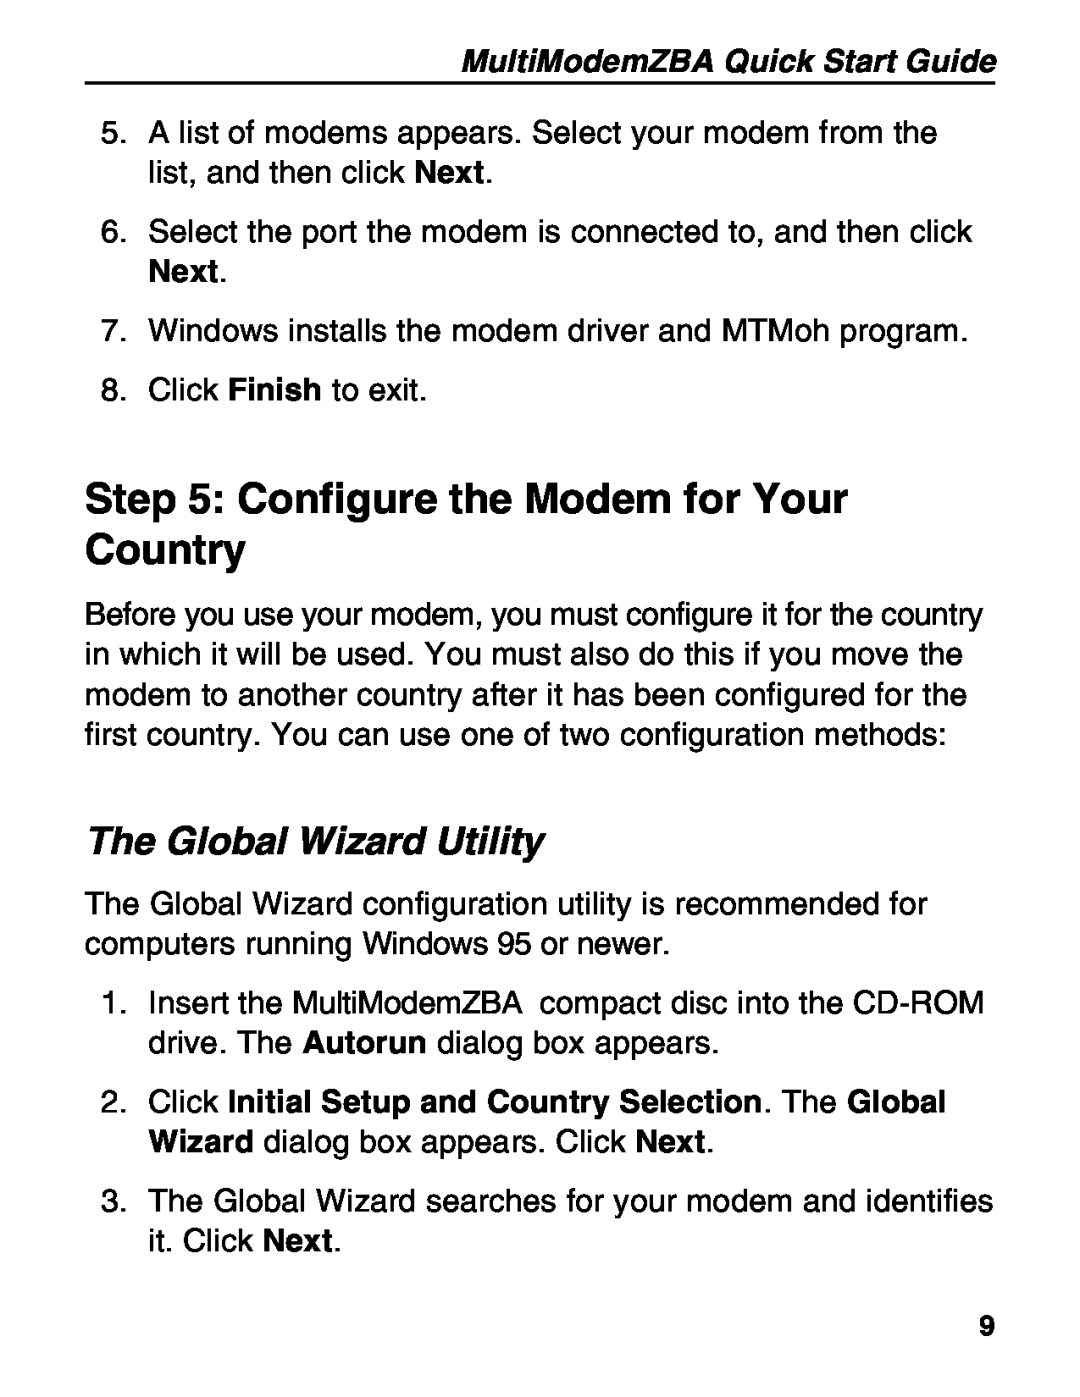 Multitech MT5634ZBA-V92 Configure the Modem for Your Country, The Global Wizard Utility, MultiModemZBA Quick Start Guide 